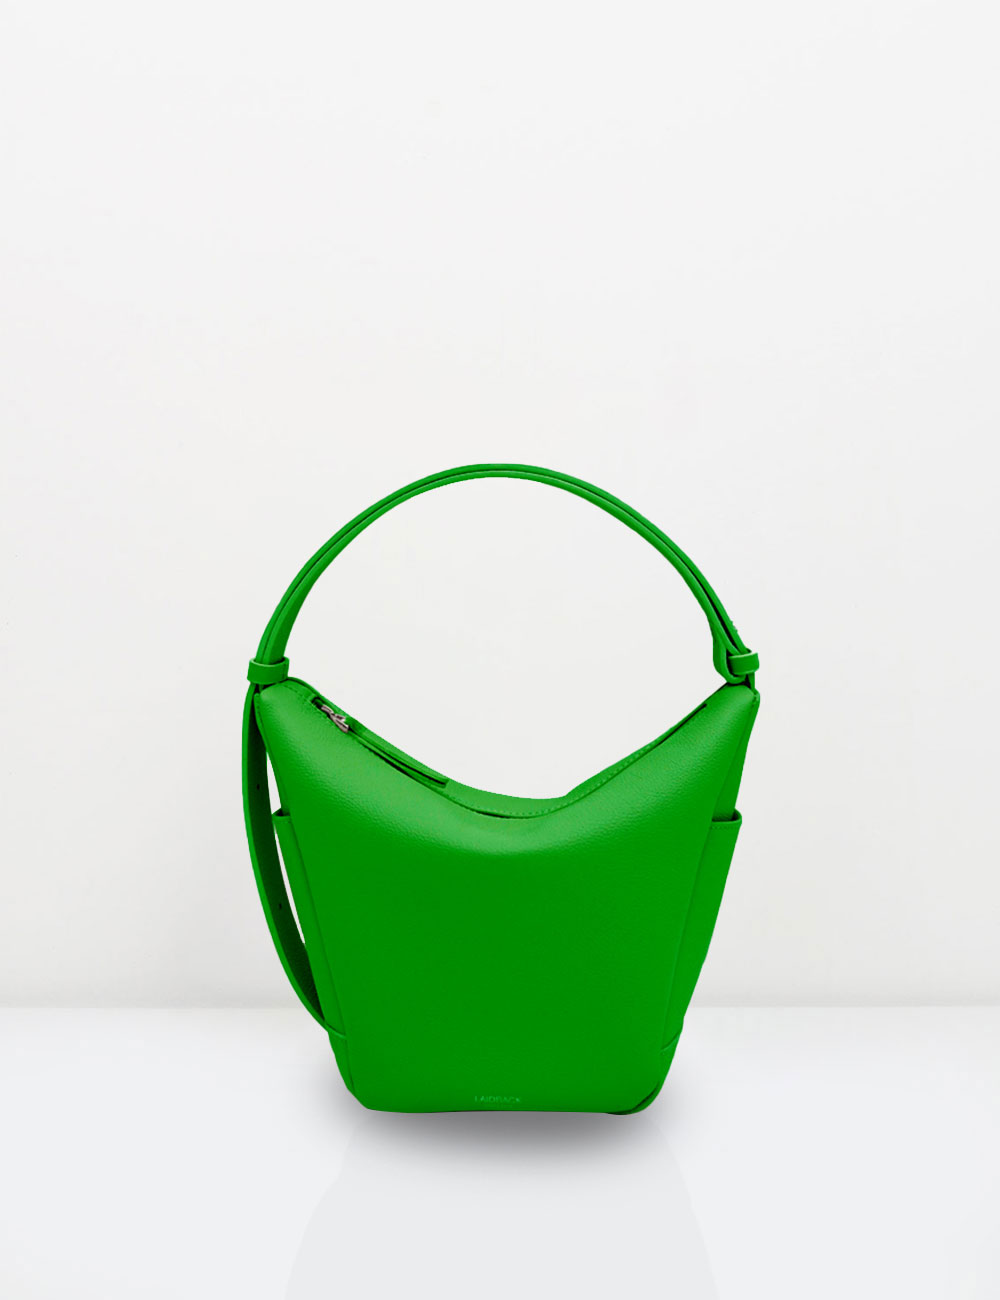 Nut bag / green (sold out)